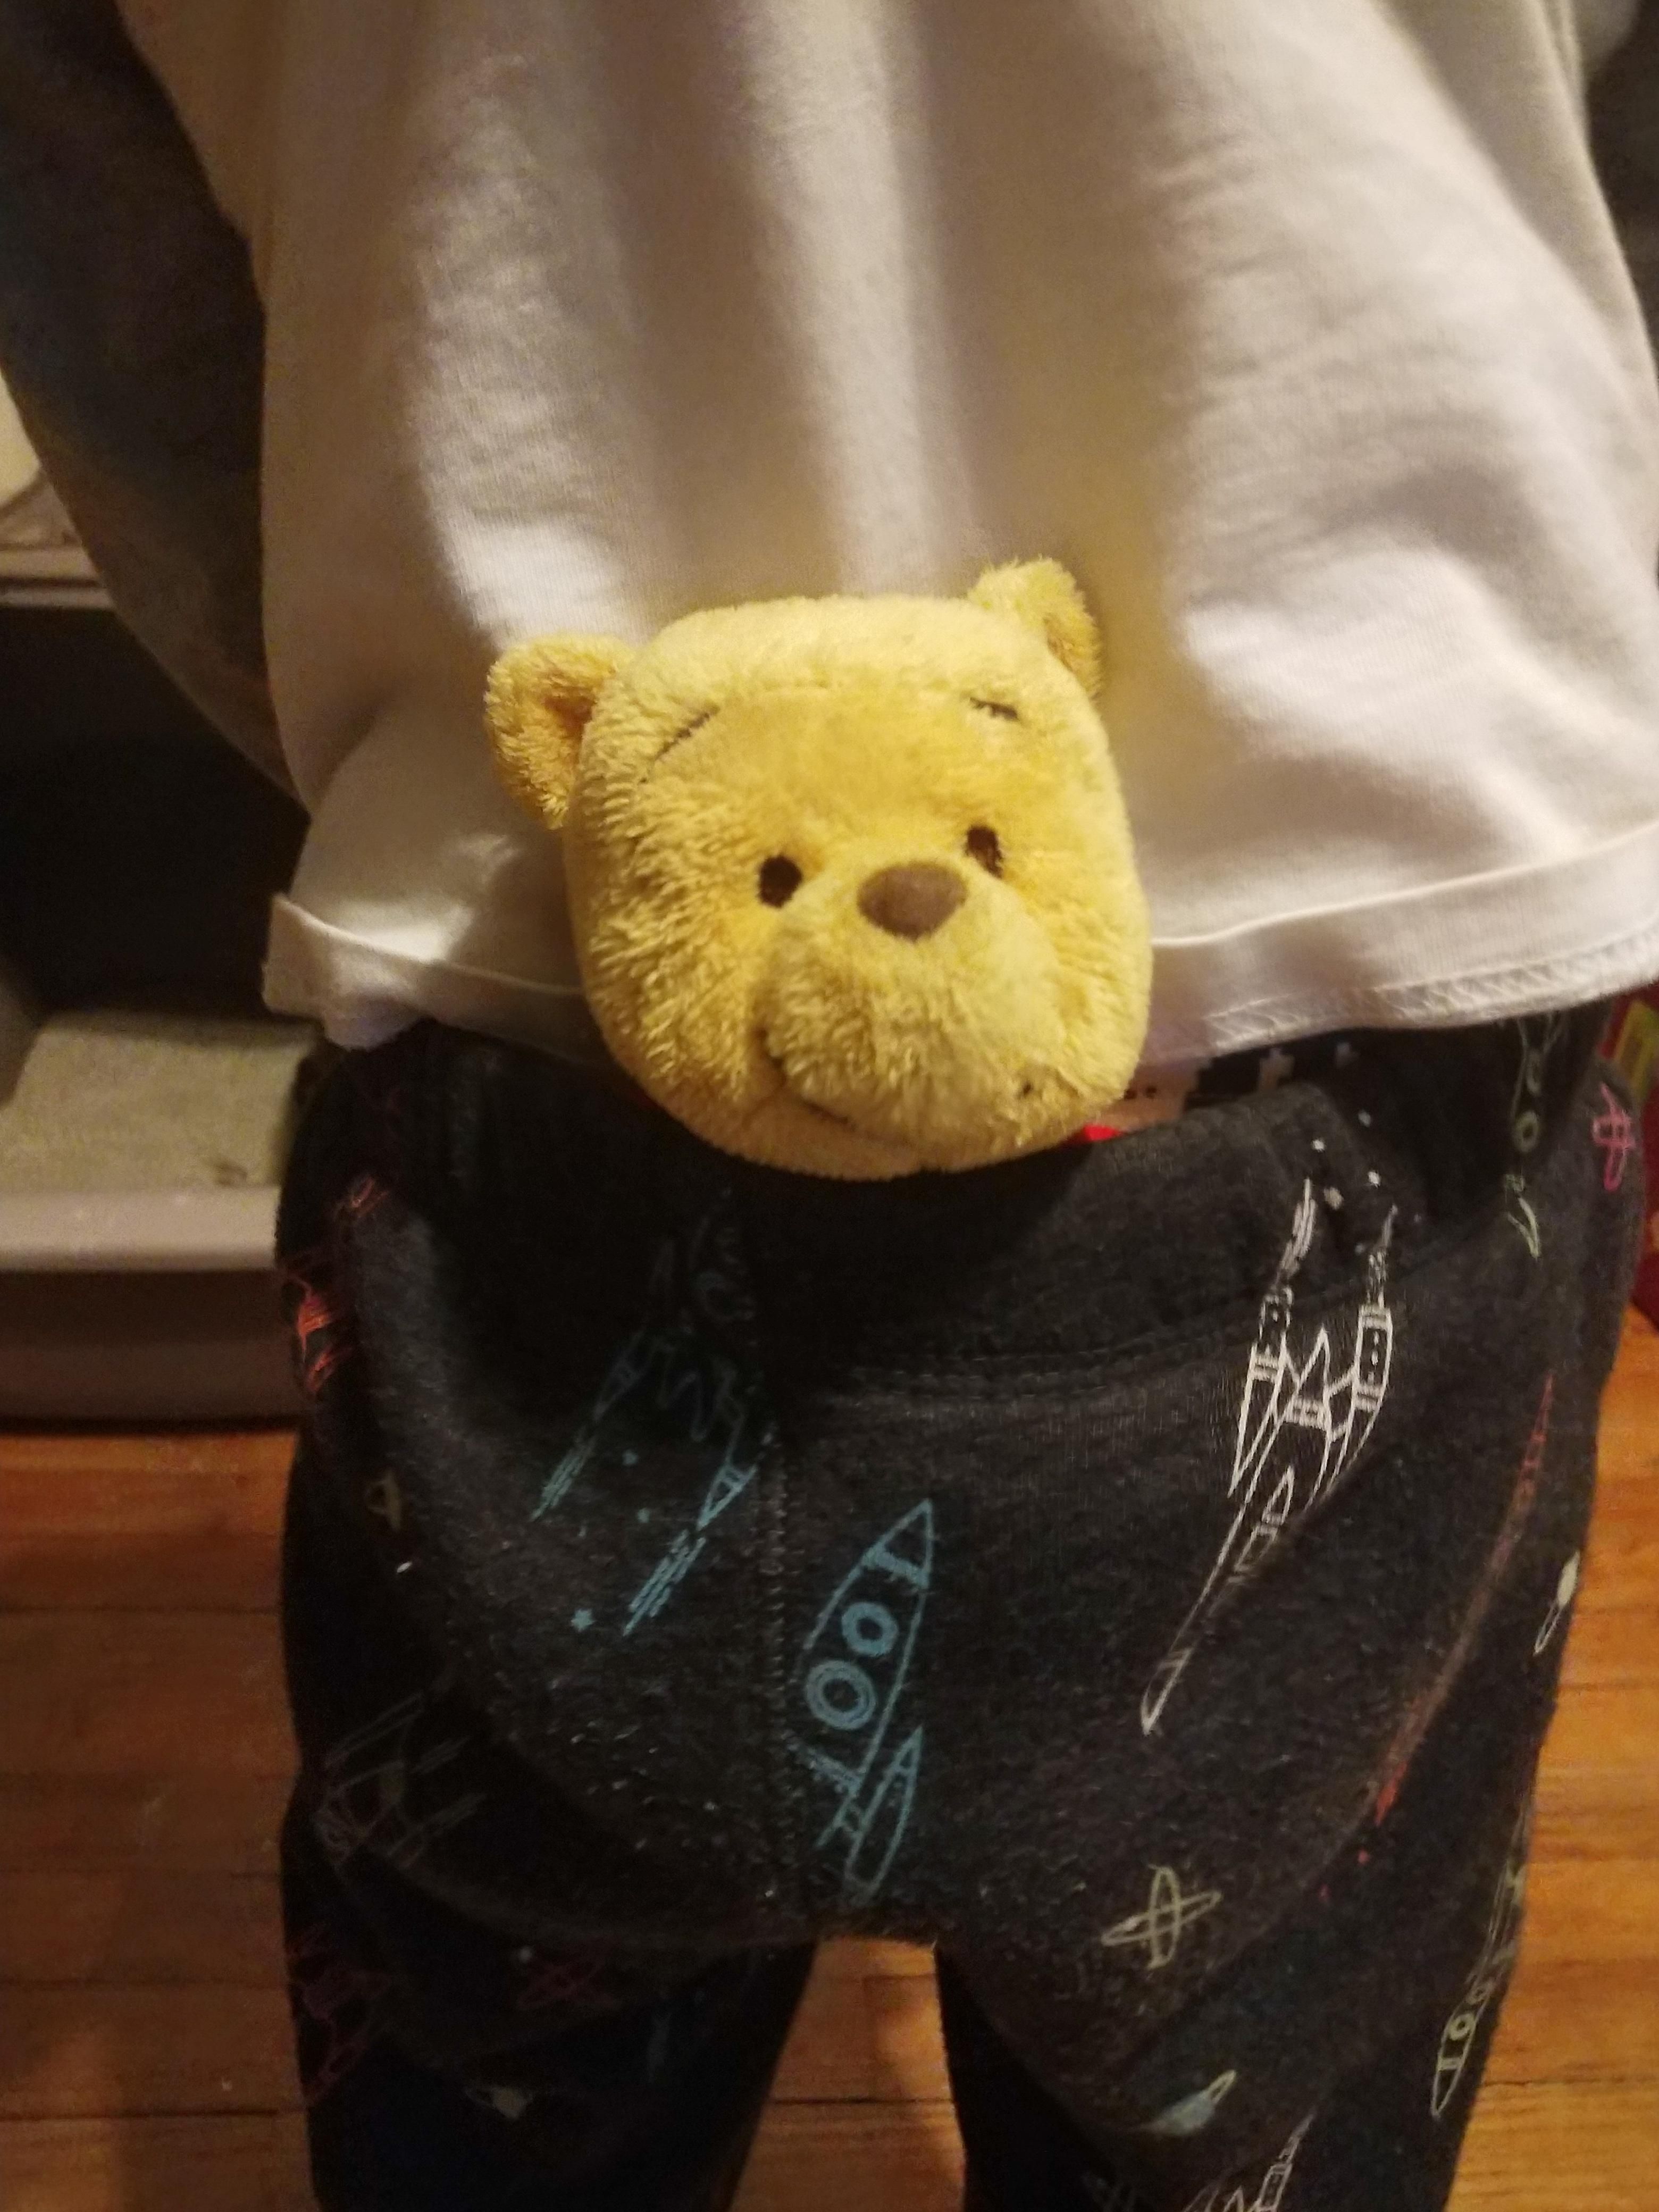 Our kid just caused a family panic by running into the room and telling us he had Pooh in his pants.